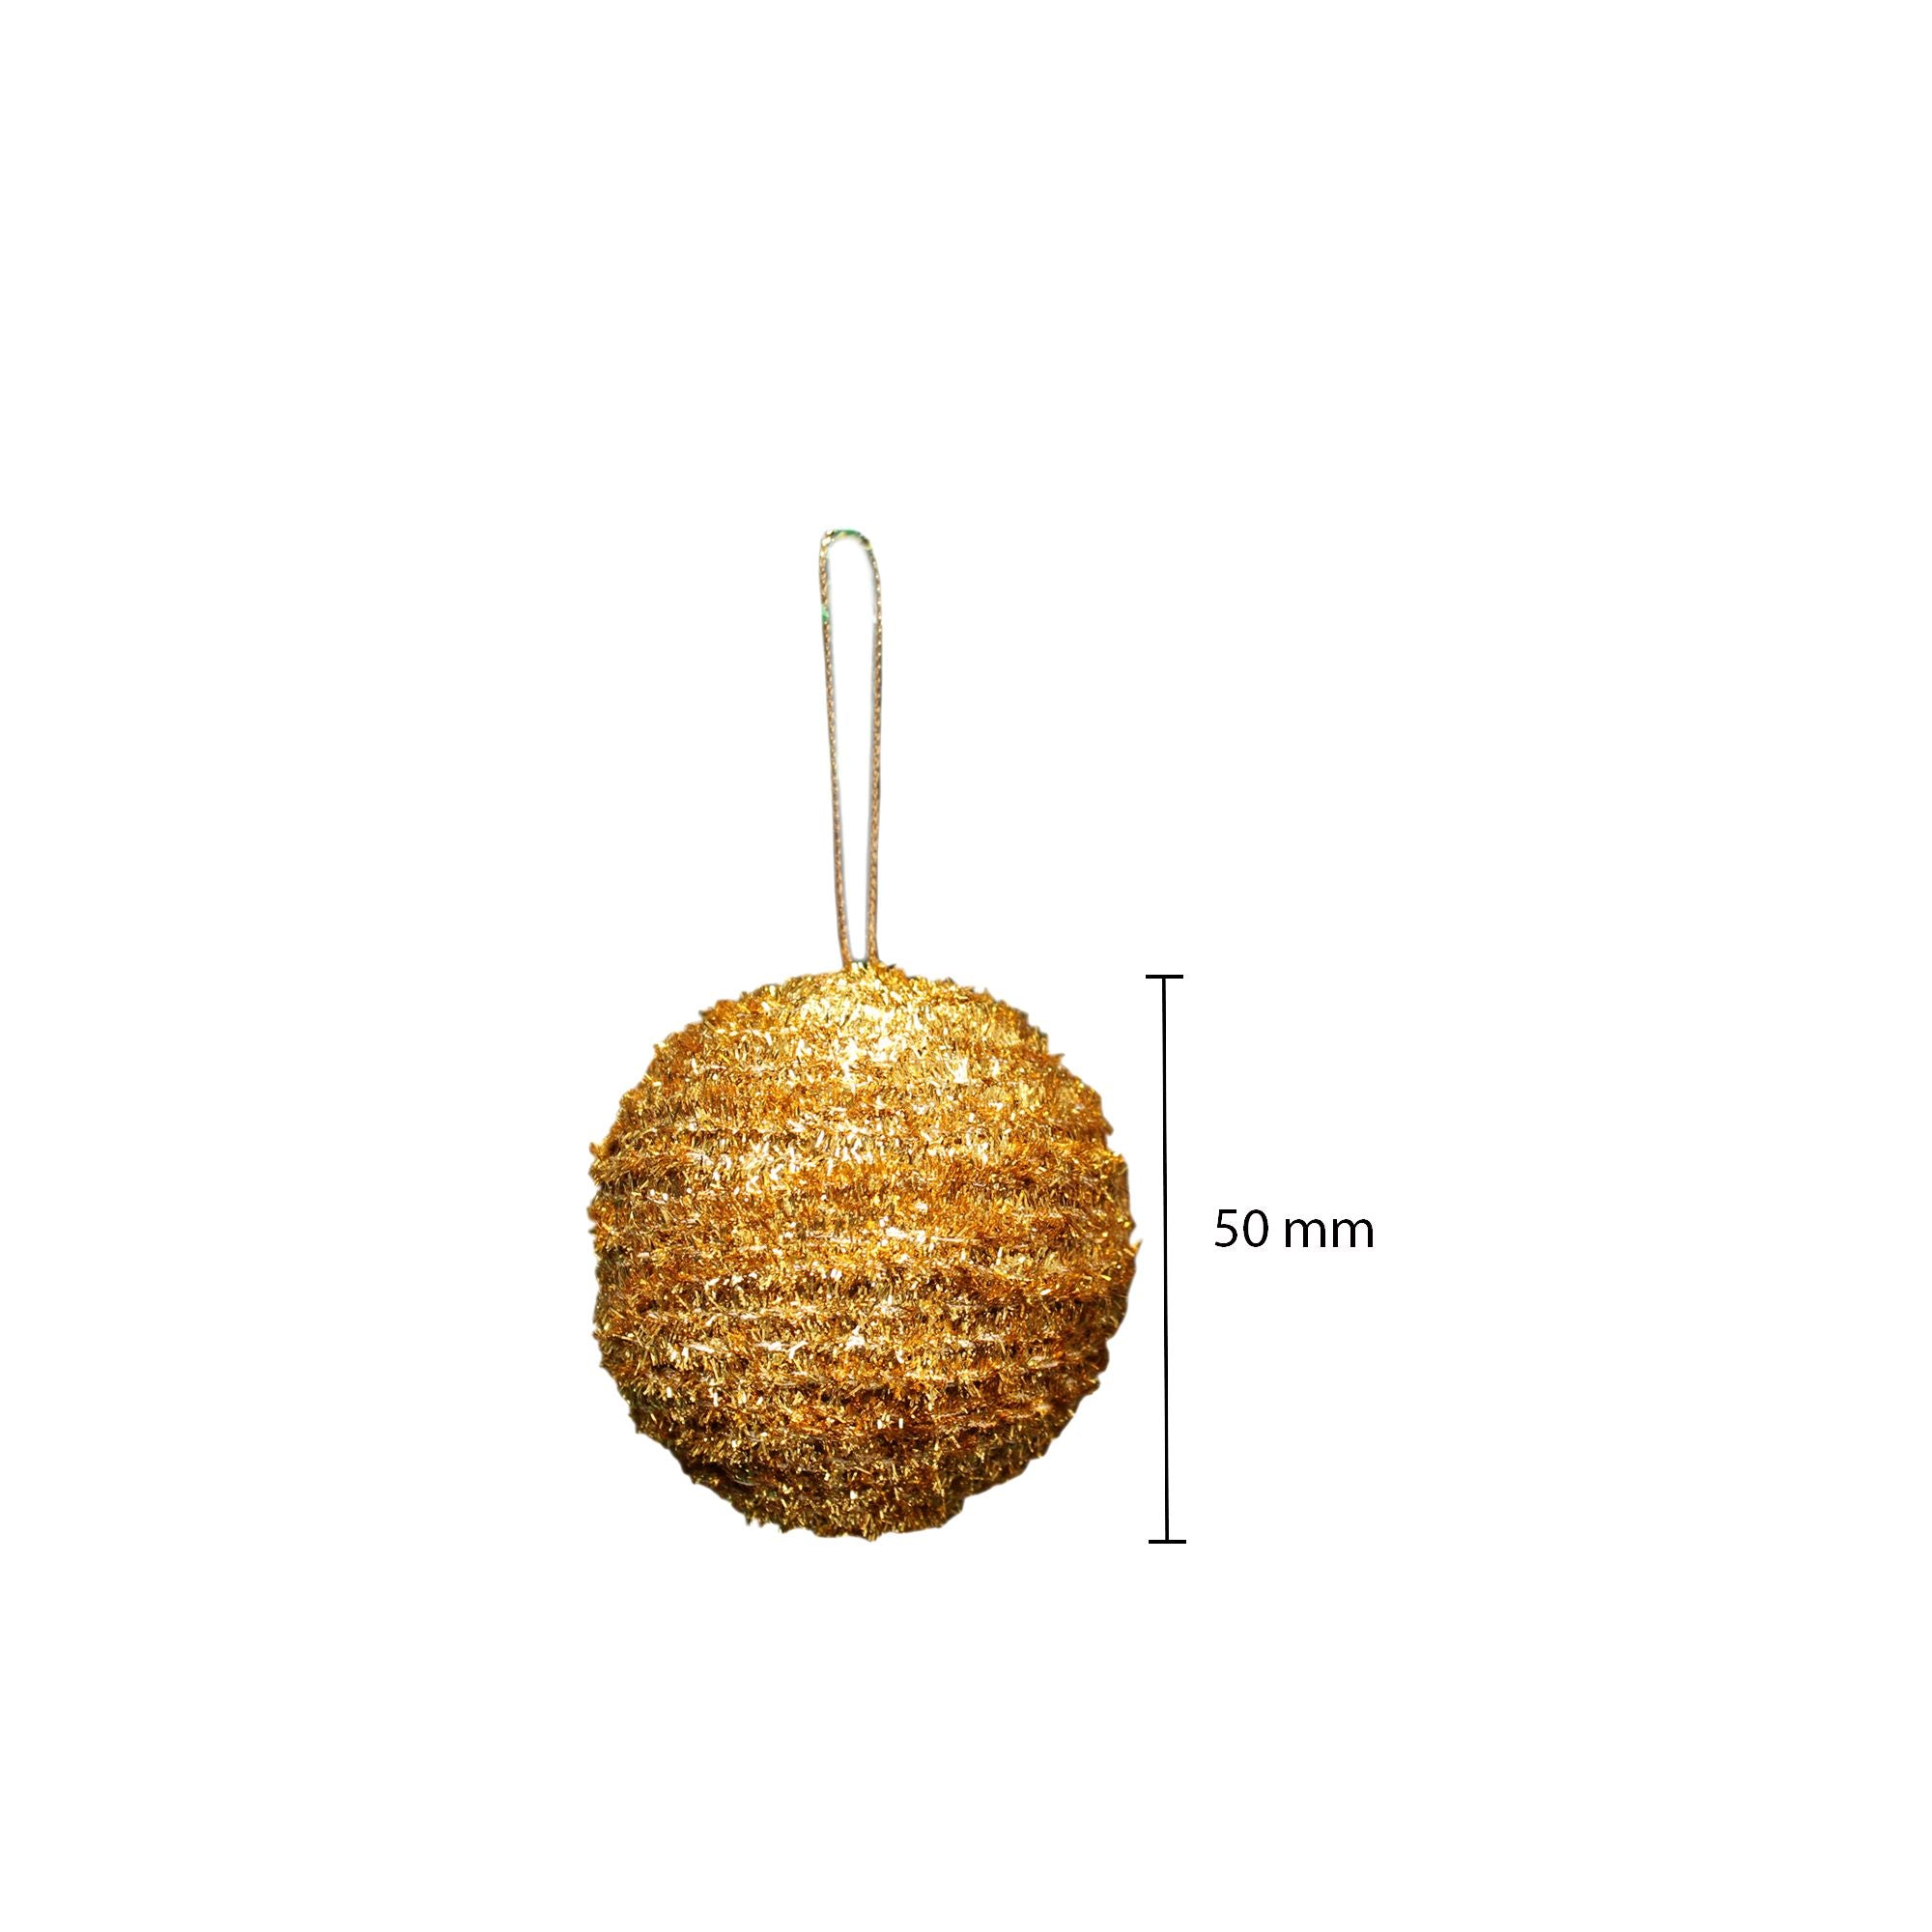 Handmade Christmas Ornaments - Tinsel Bauble, 50mm, Gold, 4pc